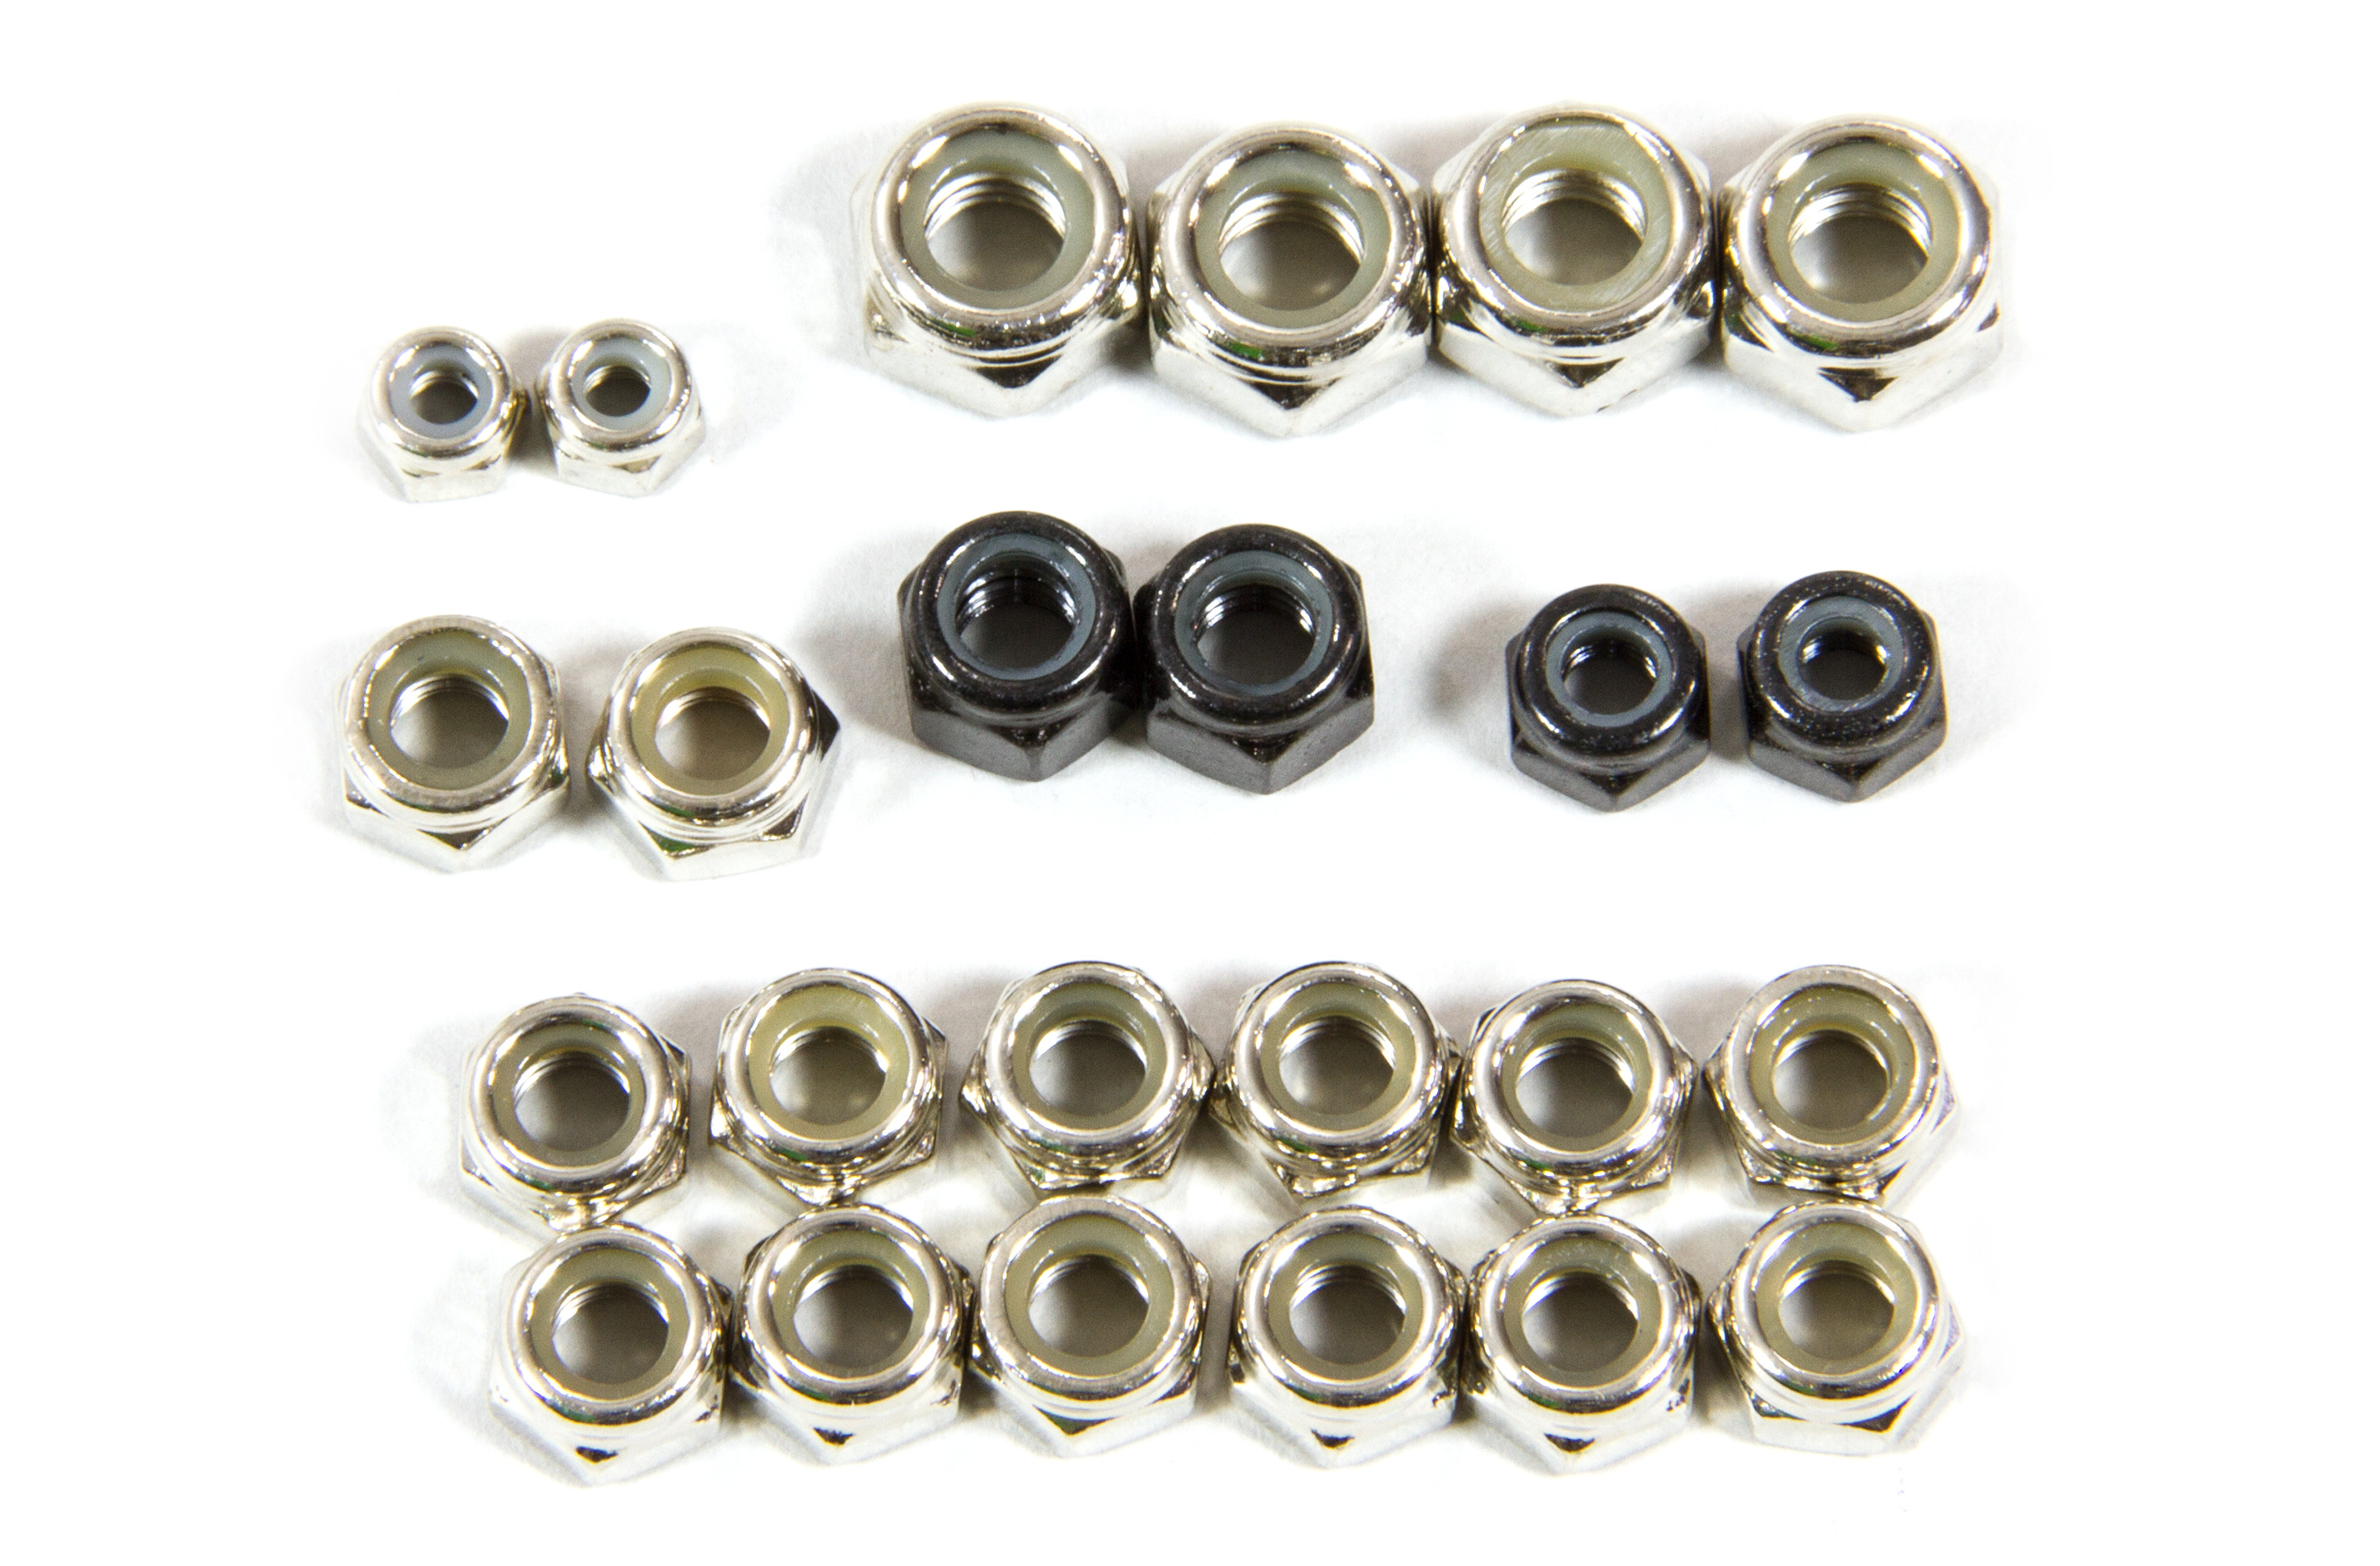 LOSB6590 Losi Lock Nut Asst. 3,4,5,6 mm 5ive-T, TLR 5ive-B and Mini WRC